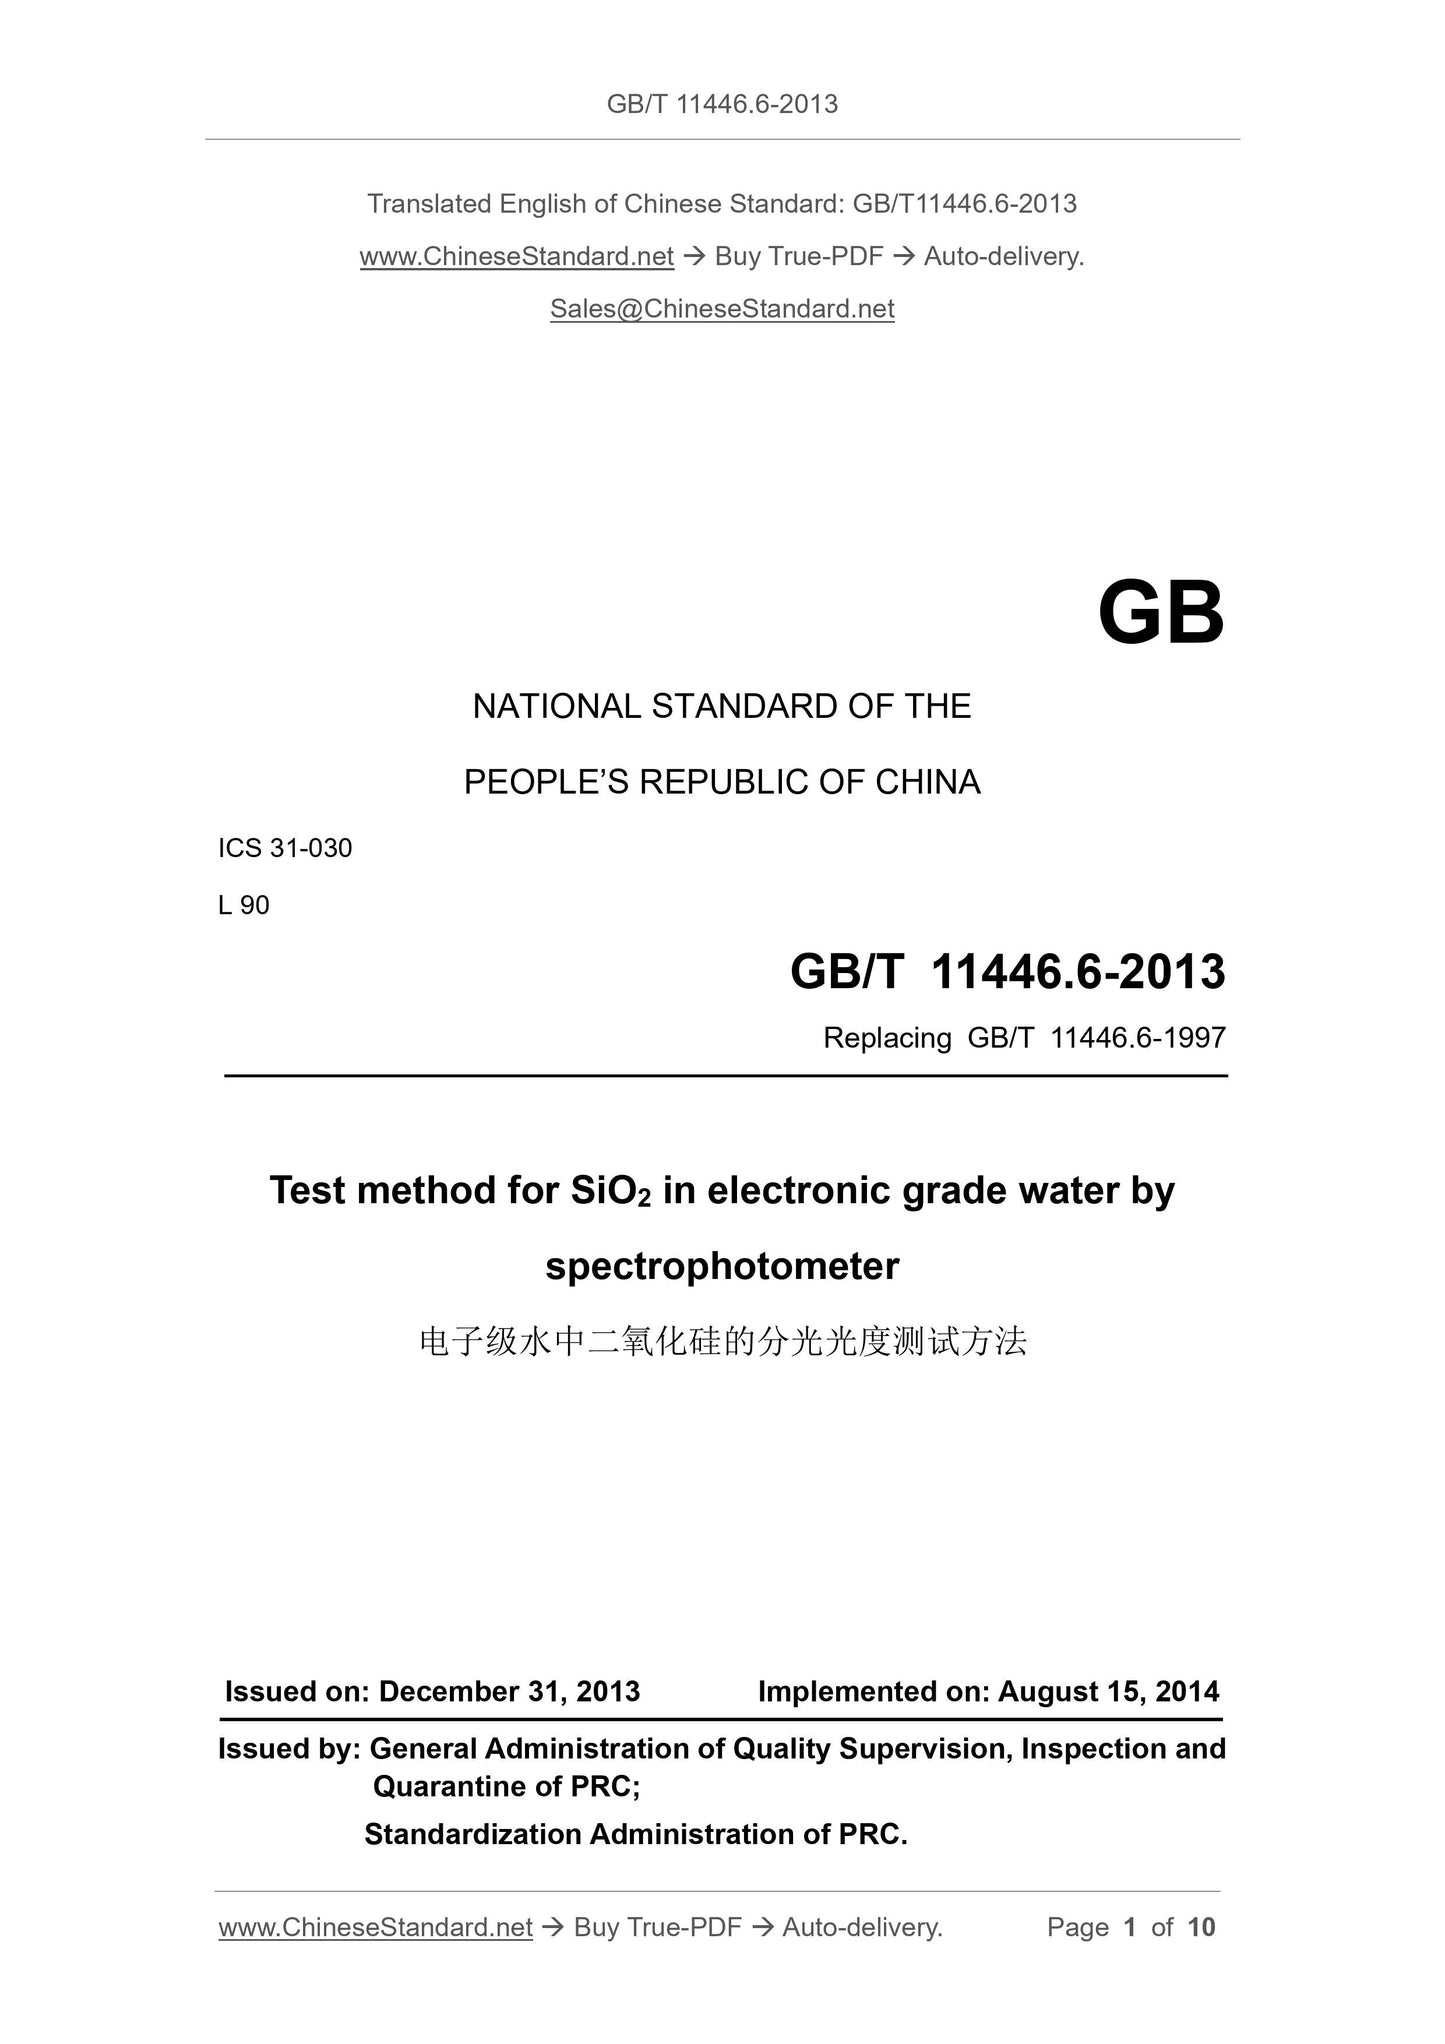 GB/T 11446.6-2013 Page 1